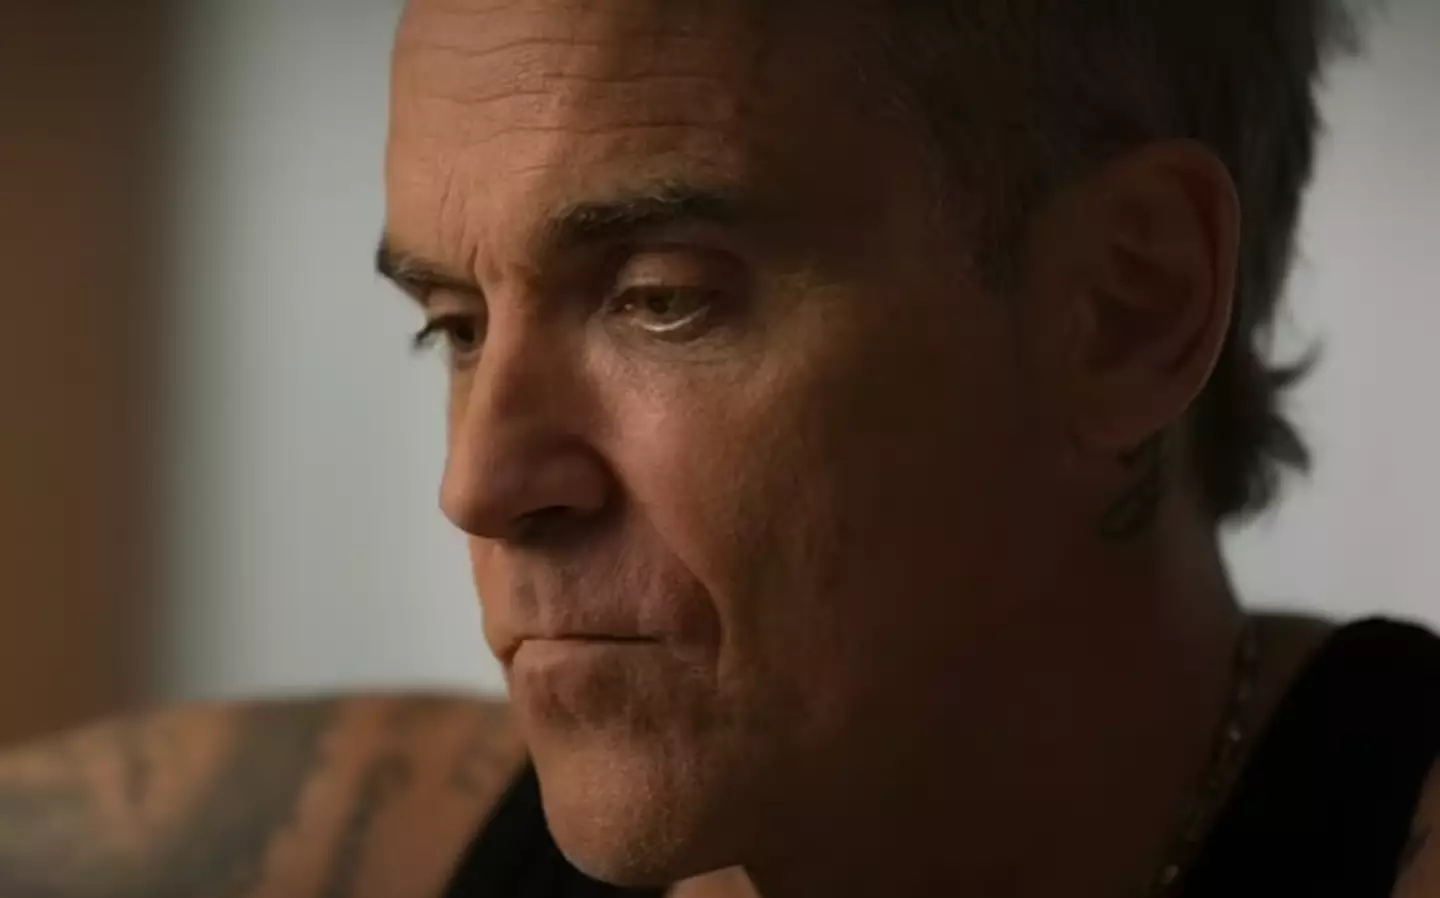 Robbie opens up about his struggles with addiction in the new documentary.